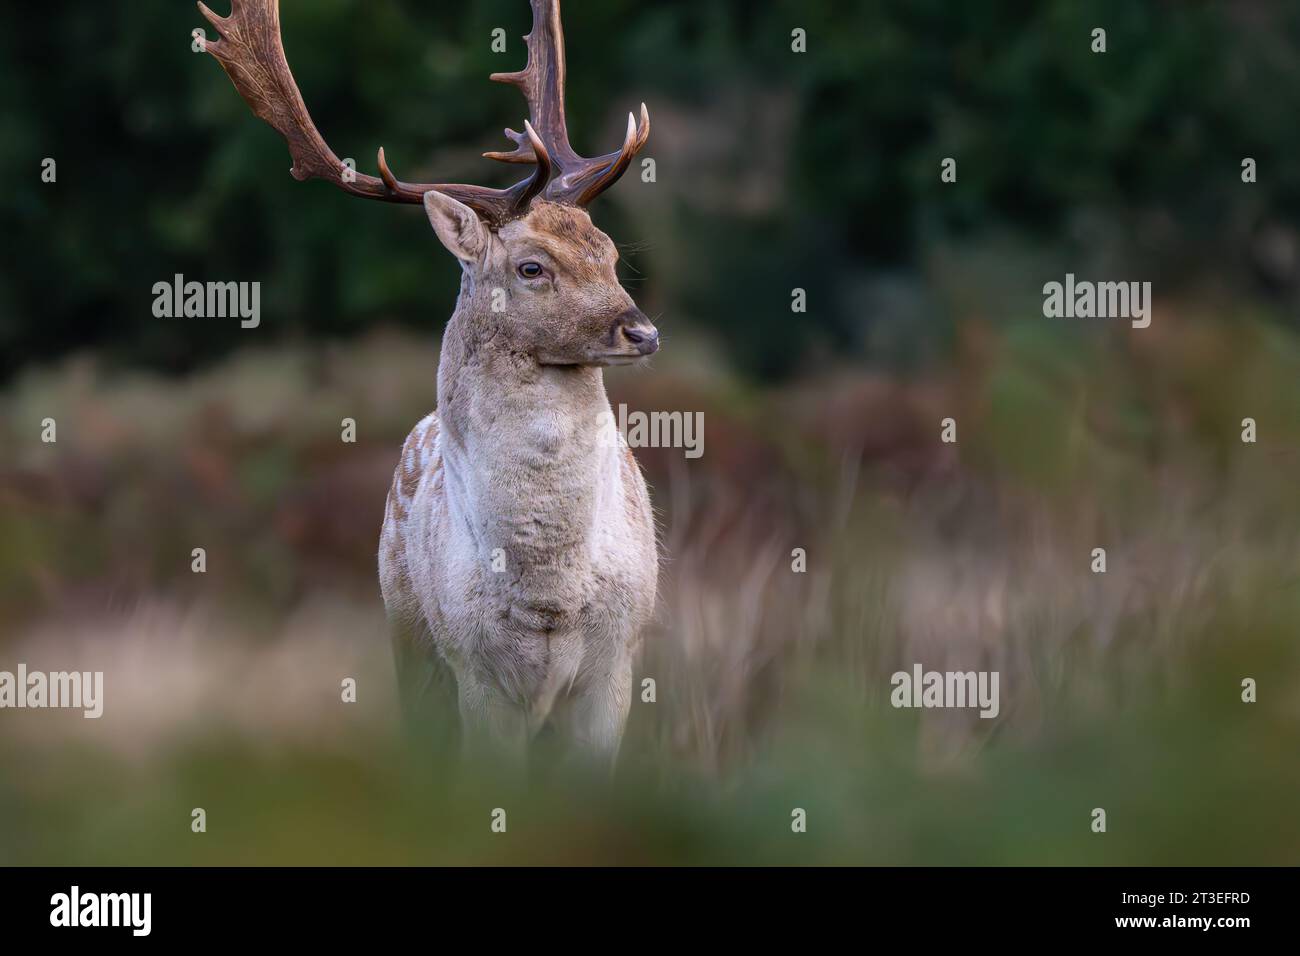 Fallow deer stag during rutting season in Richmond Park Stock Photo